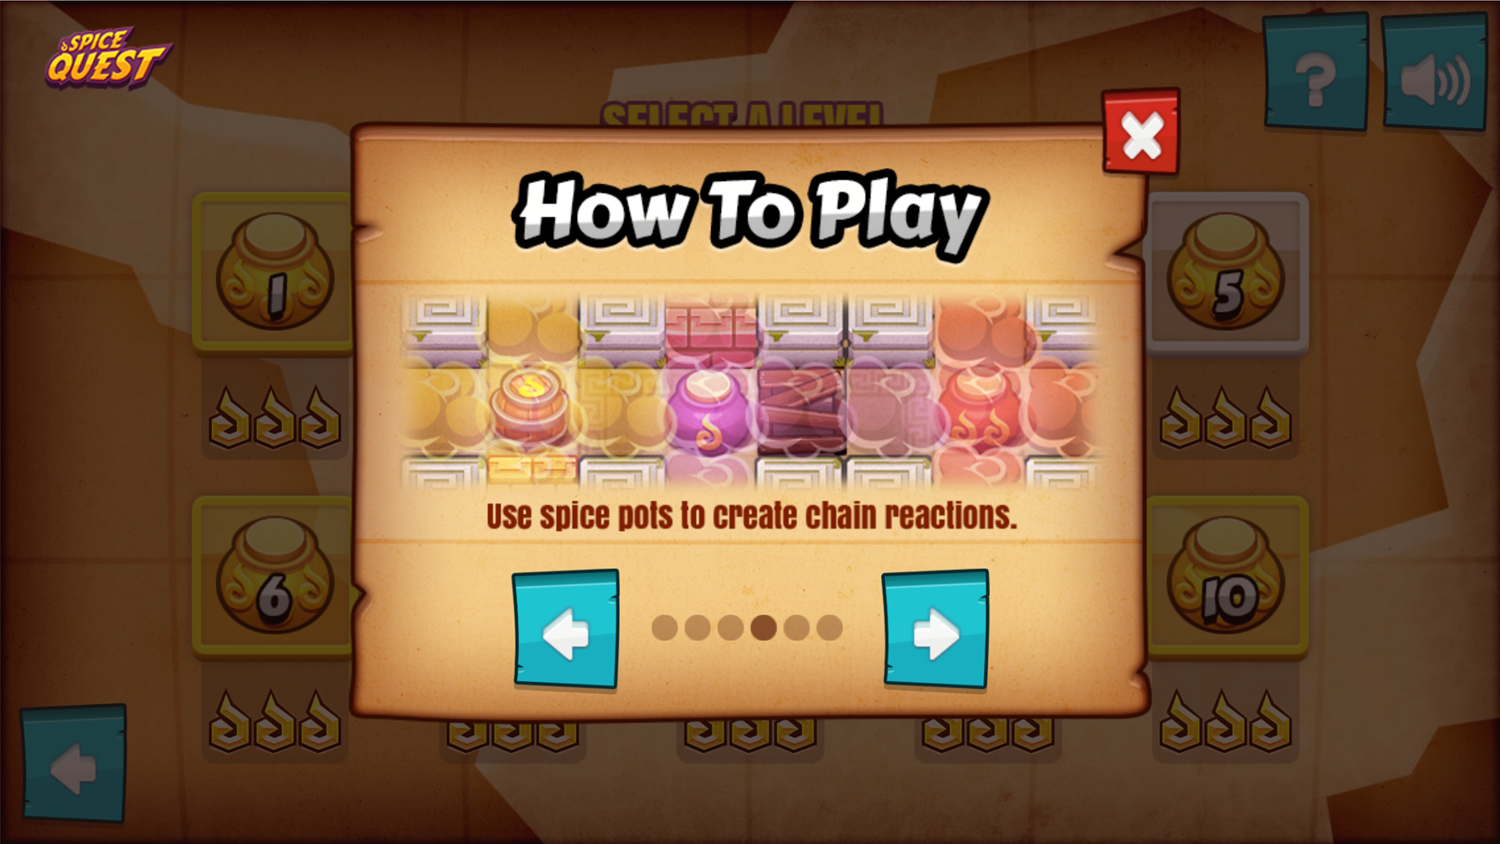 Spice Quest Game Chain Reactions Screenshot.